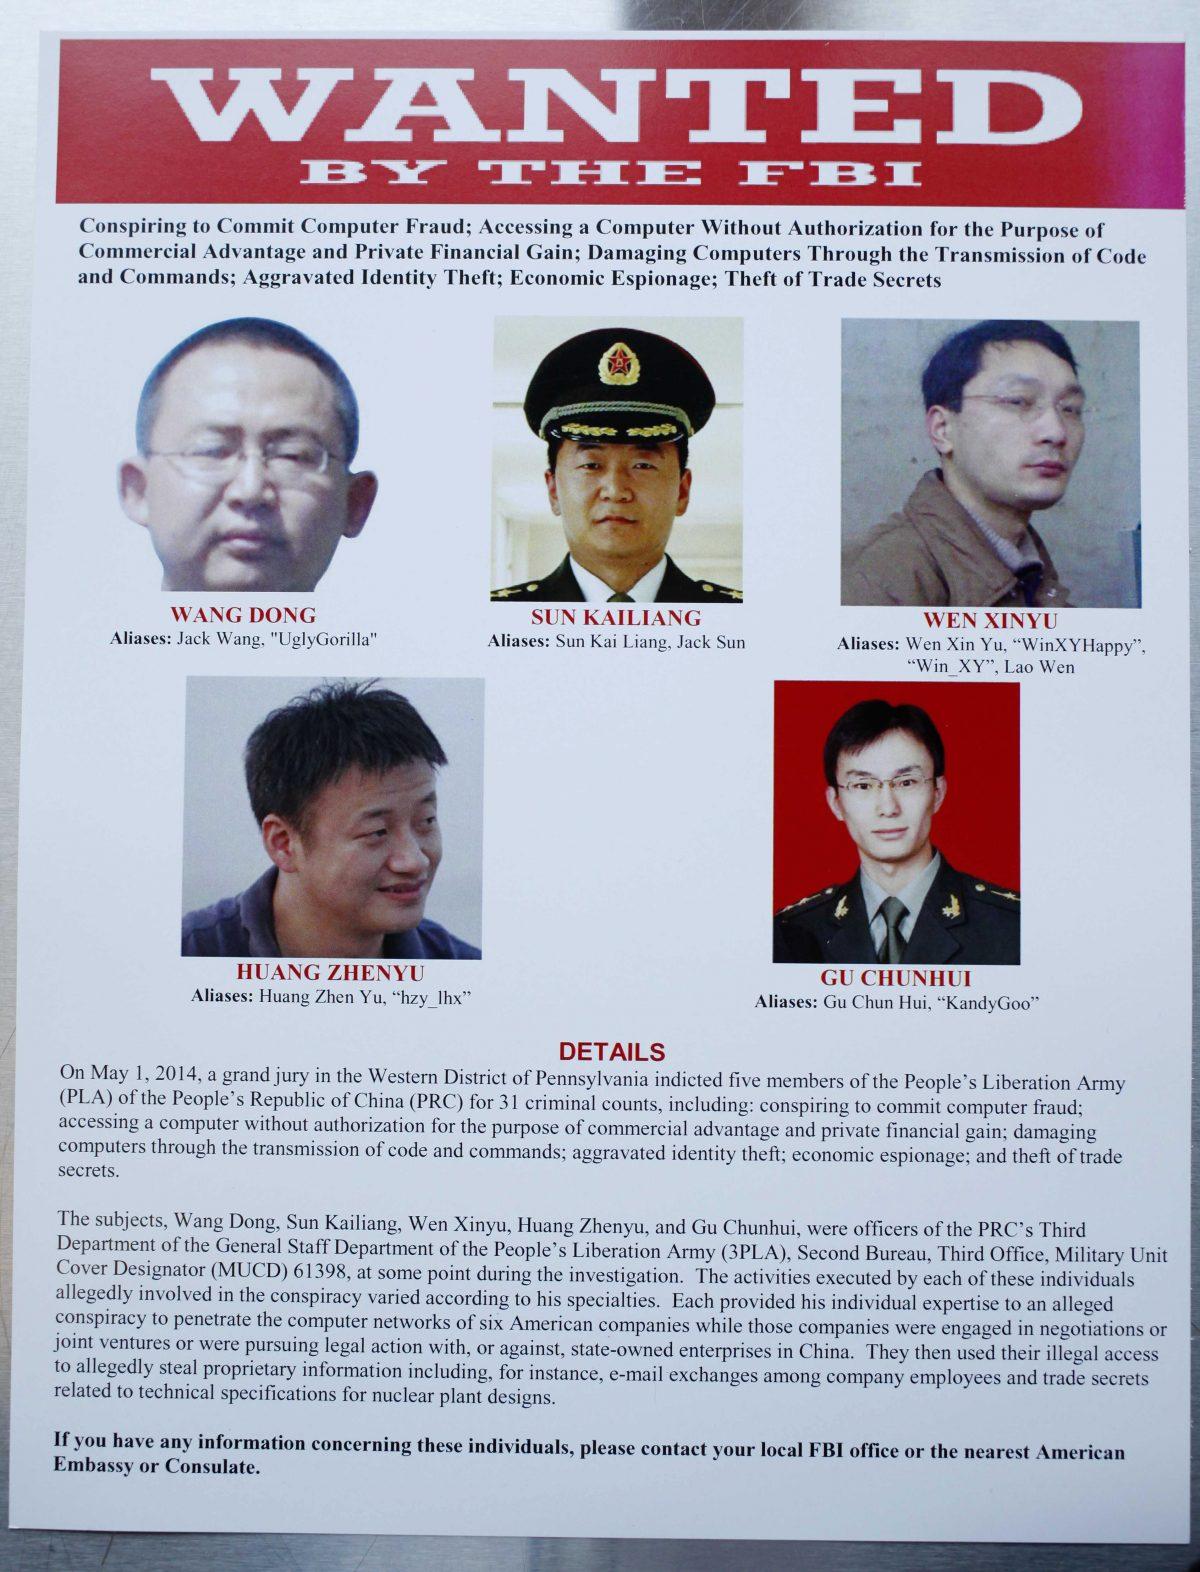 This wanted poster is displayed at the Justice Department in Washington on May 19, 2014. Then-Attorney General Eric Holder announced that a U.S. grand jury charged five Chinese hackers with economic espionage and trade secret theft, the first-of-its-kind criminal charges against Chinese military officials in an international cyber-espionage case. (AP Photo)